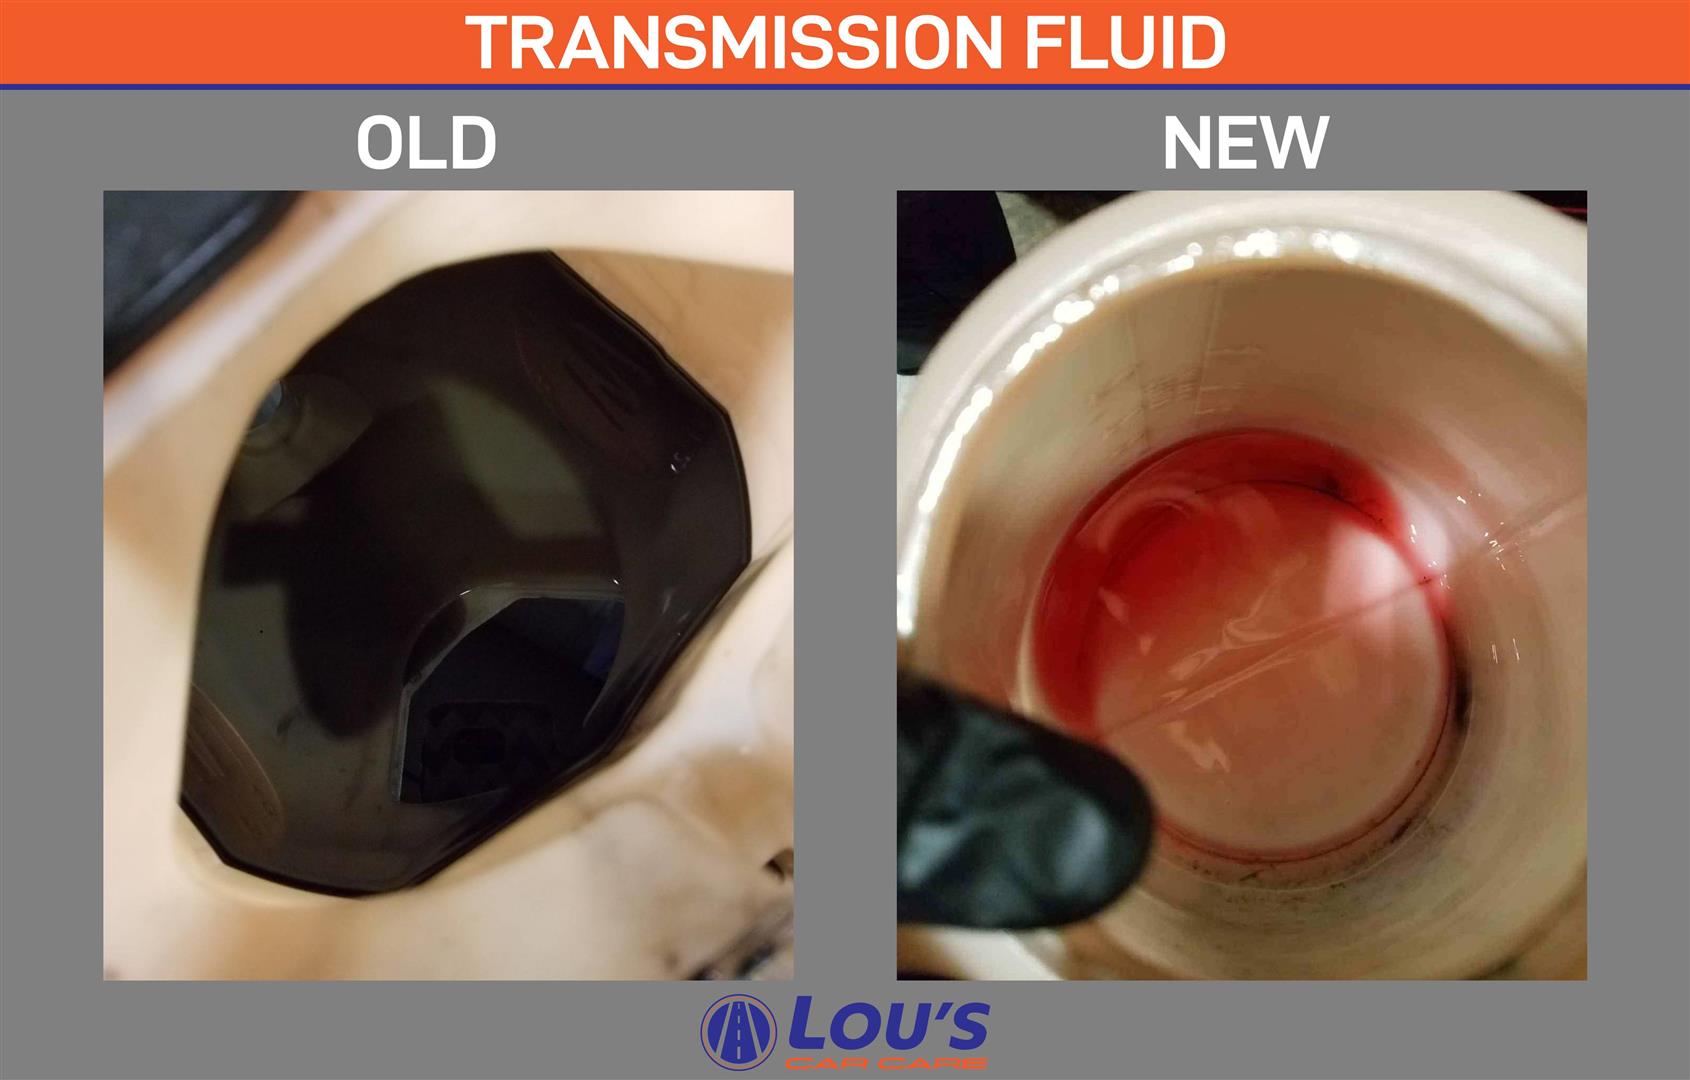 Old and New Transmission Fluid Comparison | Lou's Car Care Center, Inc.